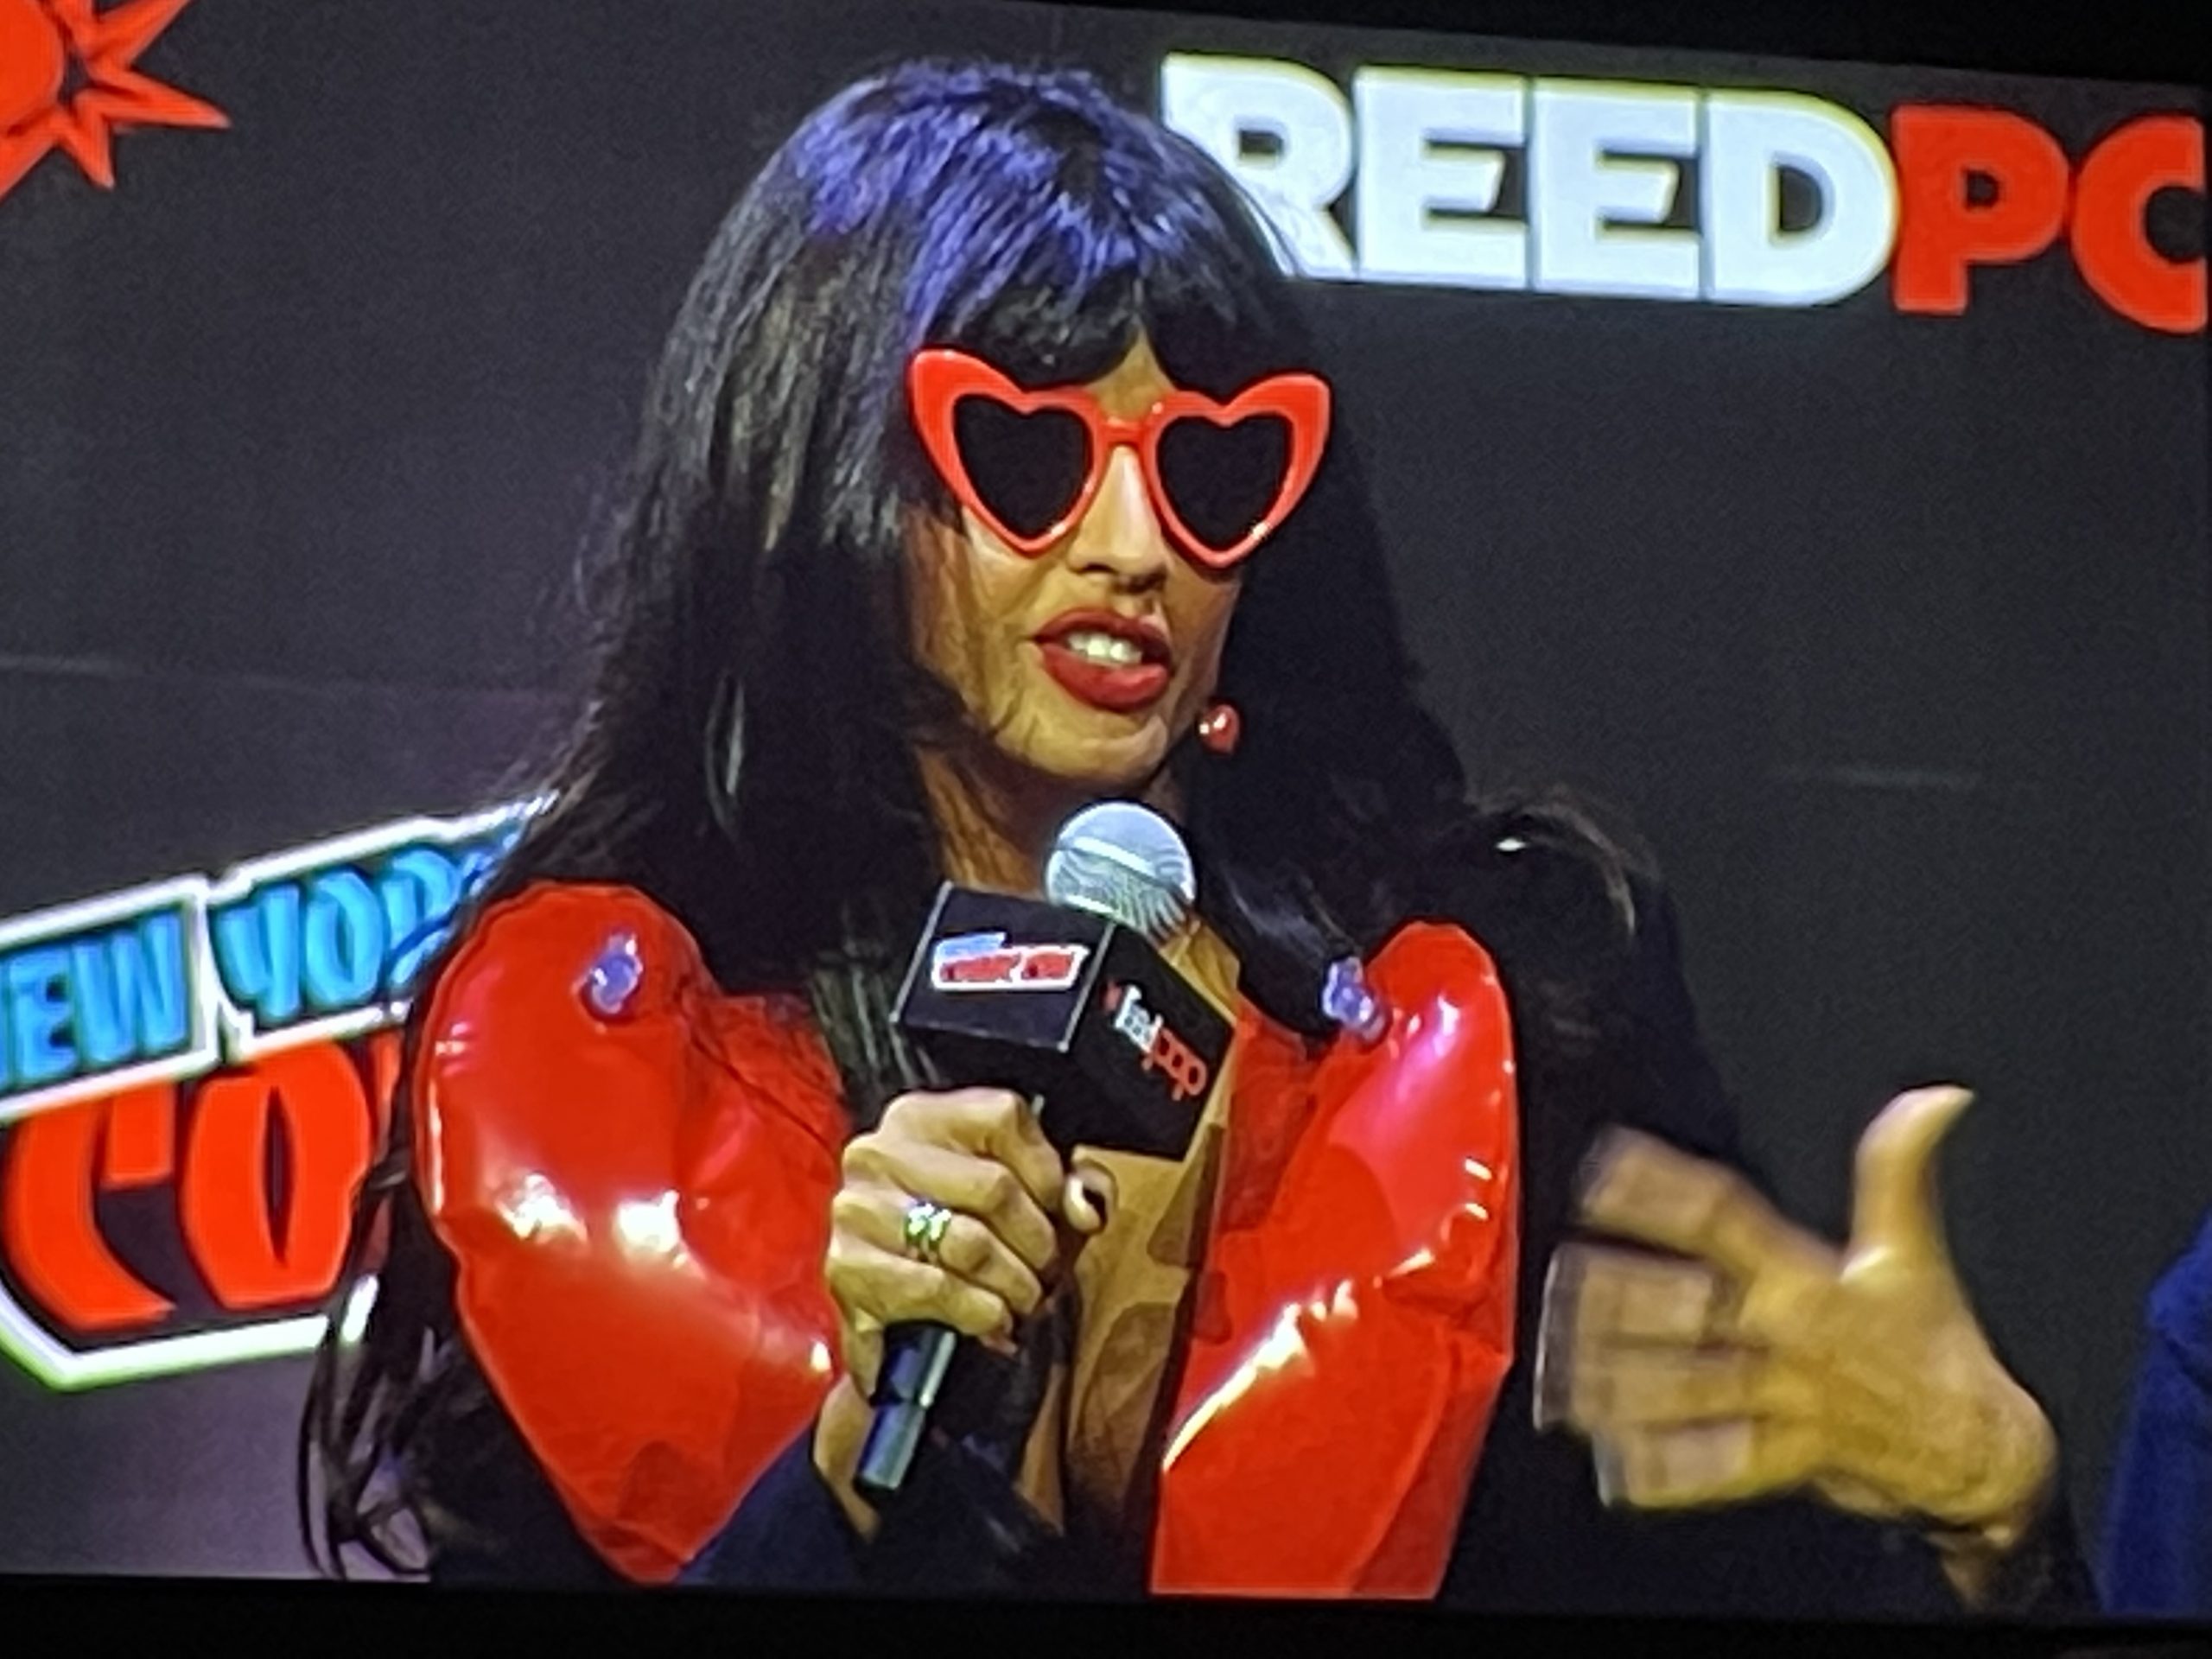 Jameela Jamil on her 'Star Trek: Prodigy' character: 'I don't think there's anyone quite like my character in the franchise'